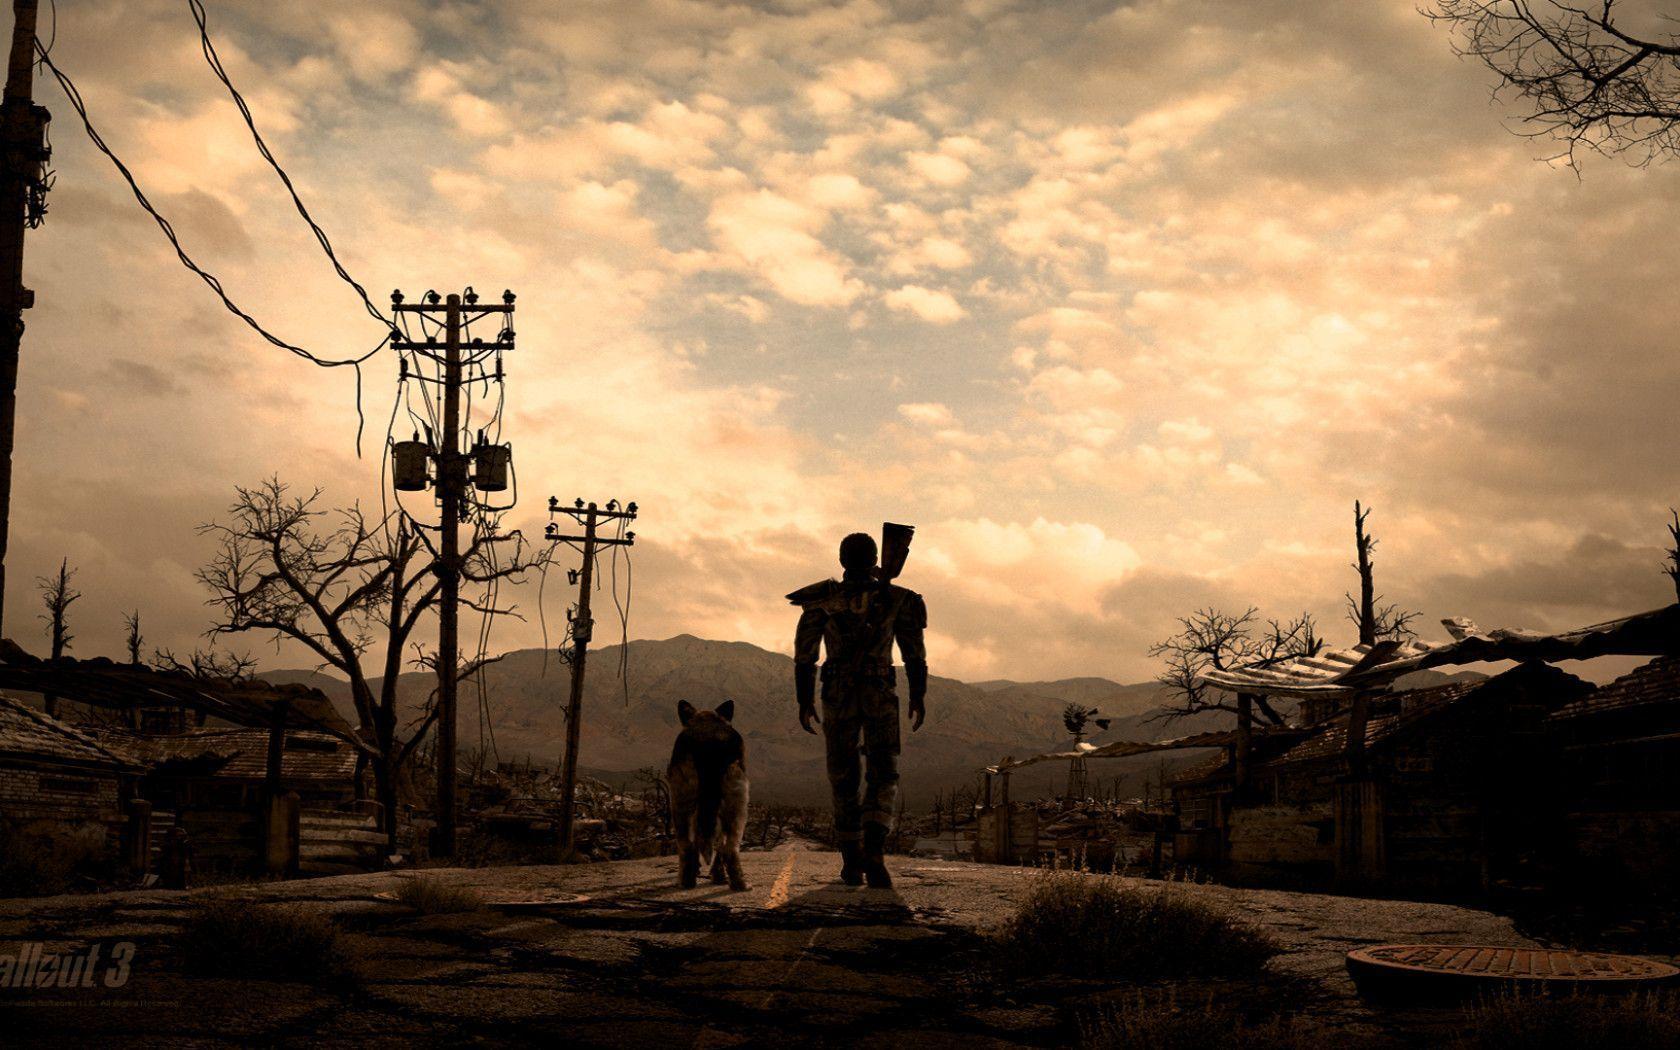 fallout 3 wallpaper HD - Image And Wallpaper free to